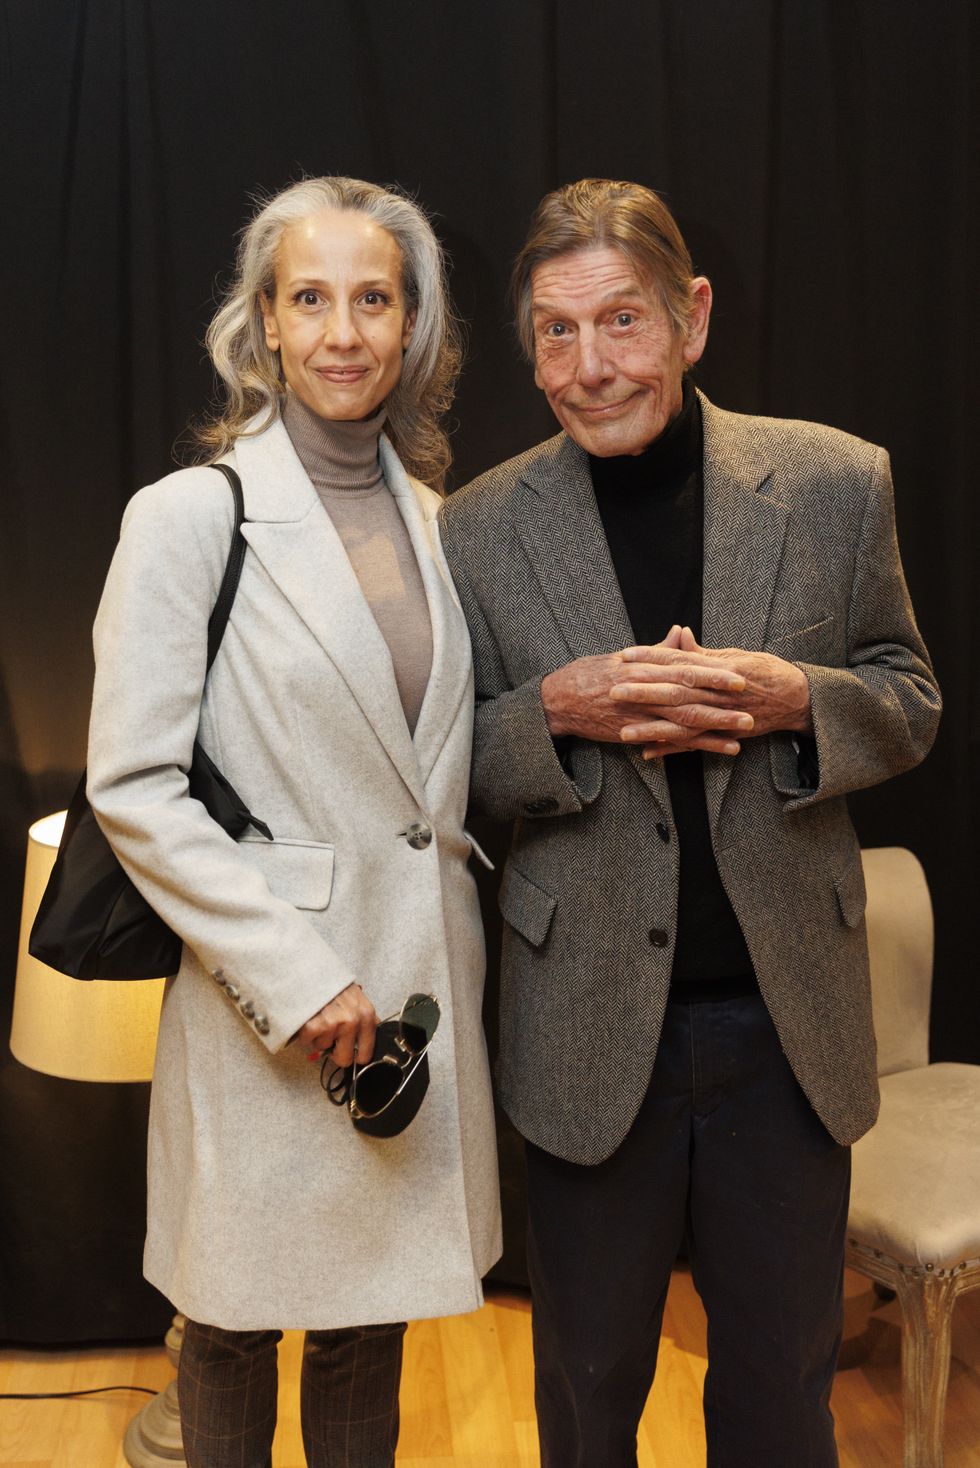 alfonso aragon  fofito   and monica aragon during presentation of encanto festival in madrid on tuesday, 18 january 2022